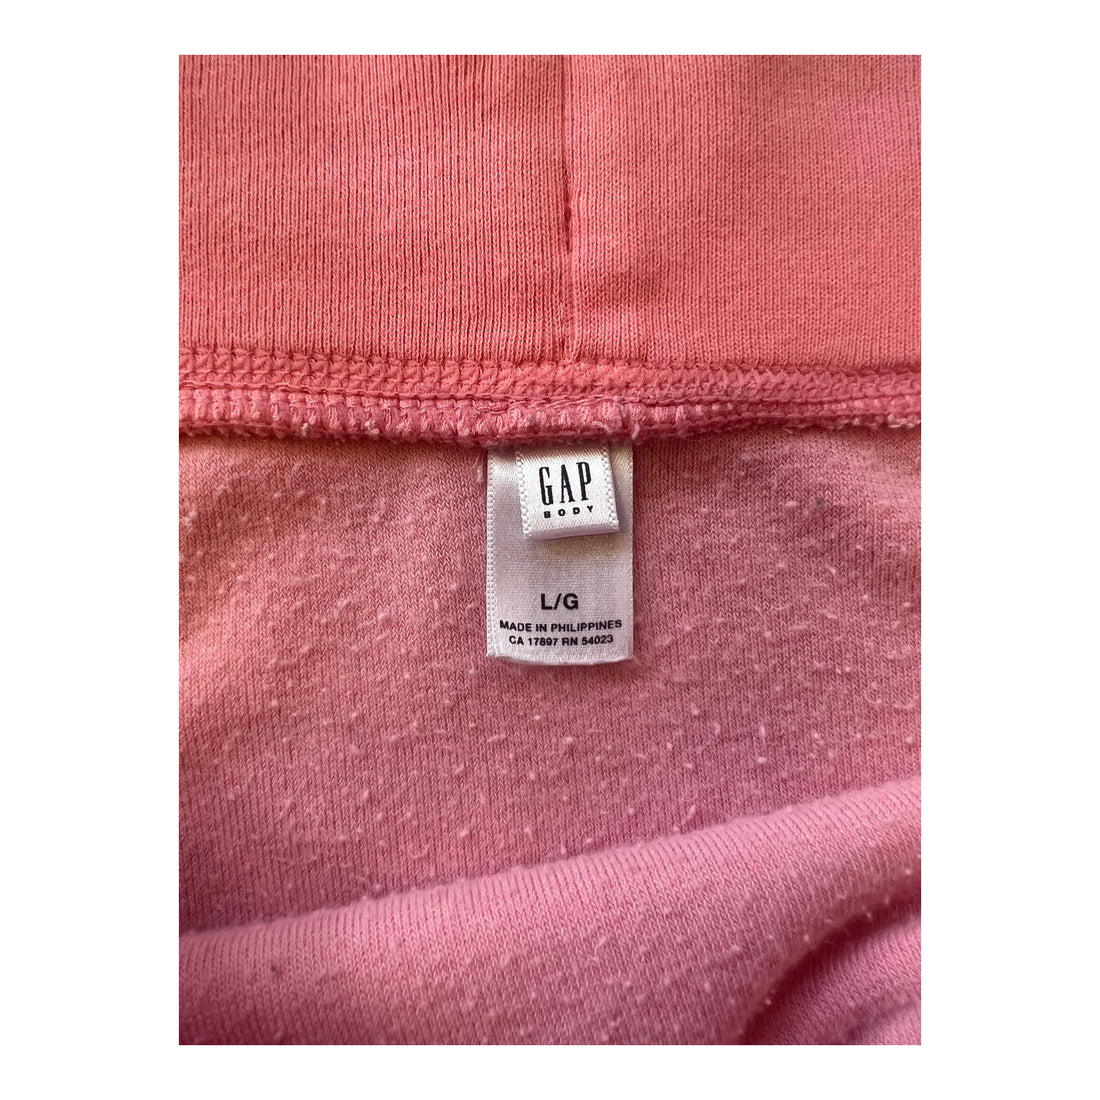 Y2K GAP TERRY CLOTH MINI SKIRT HOT GIRL PINK ‘LARGE’ - 2000S